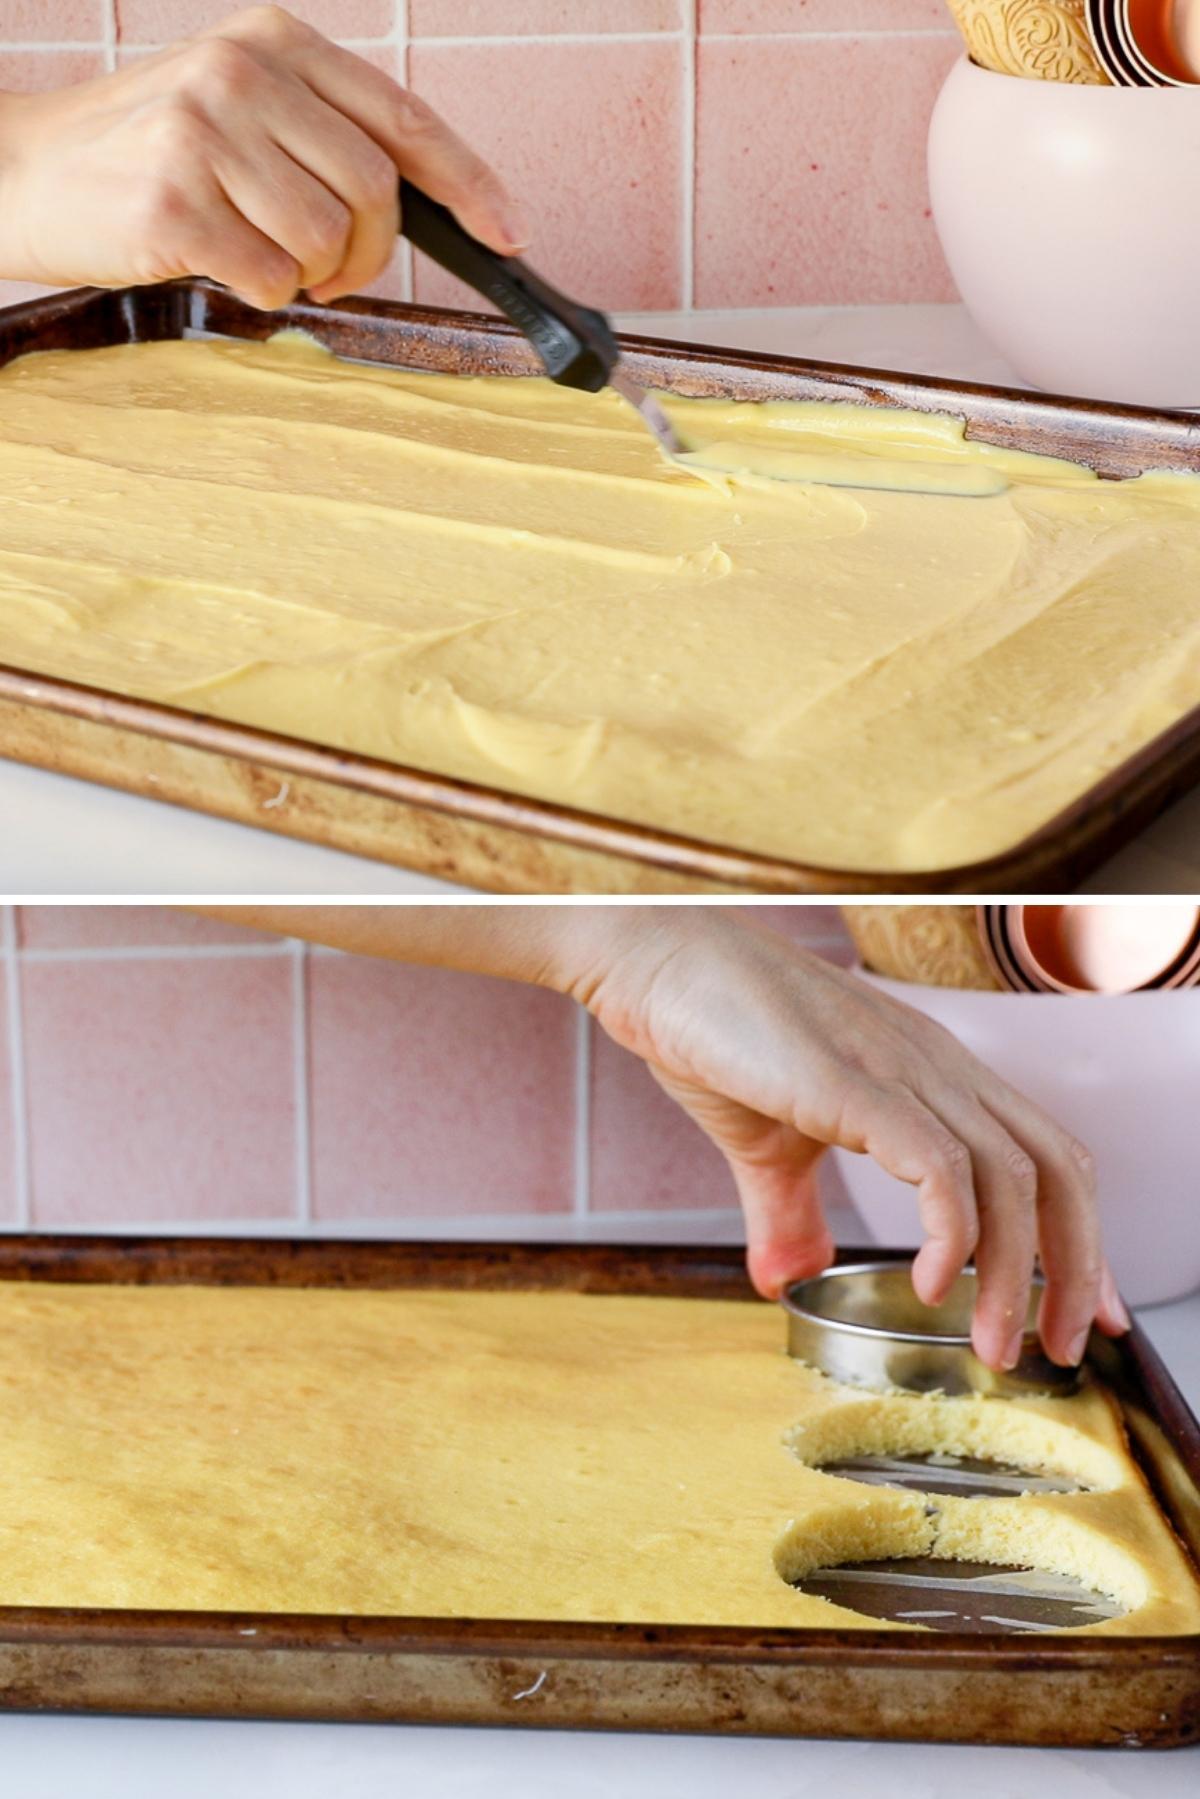 baking a cake in jelly roll pan